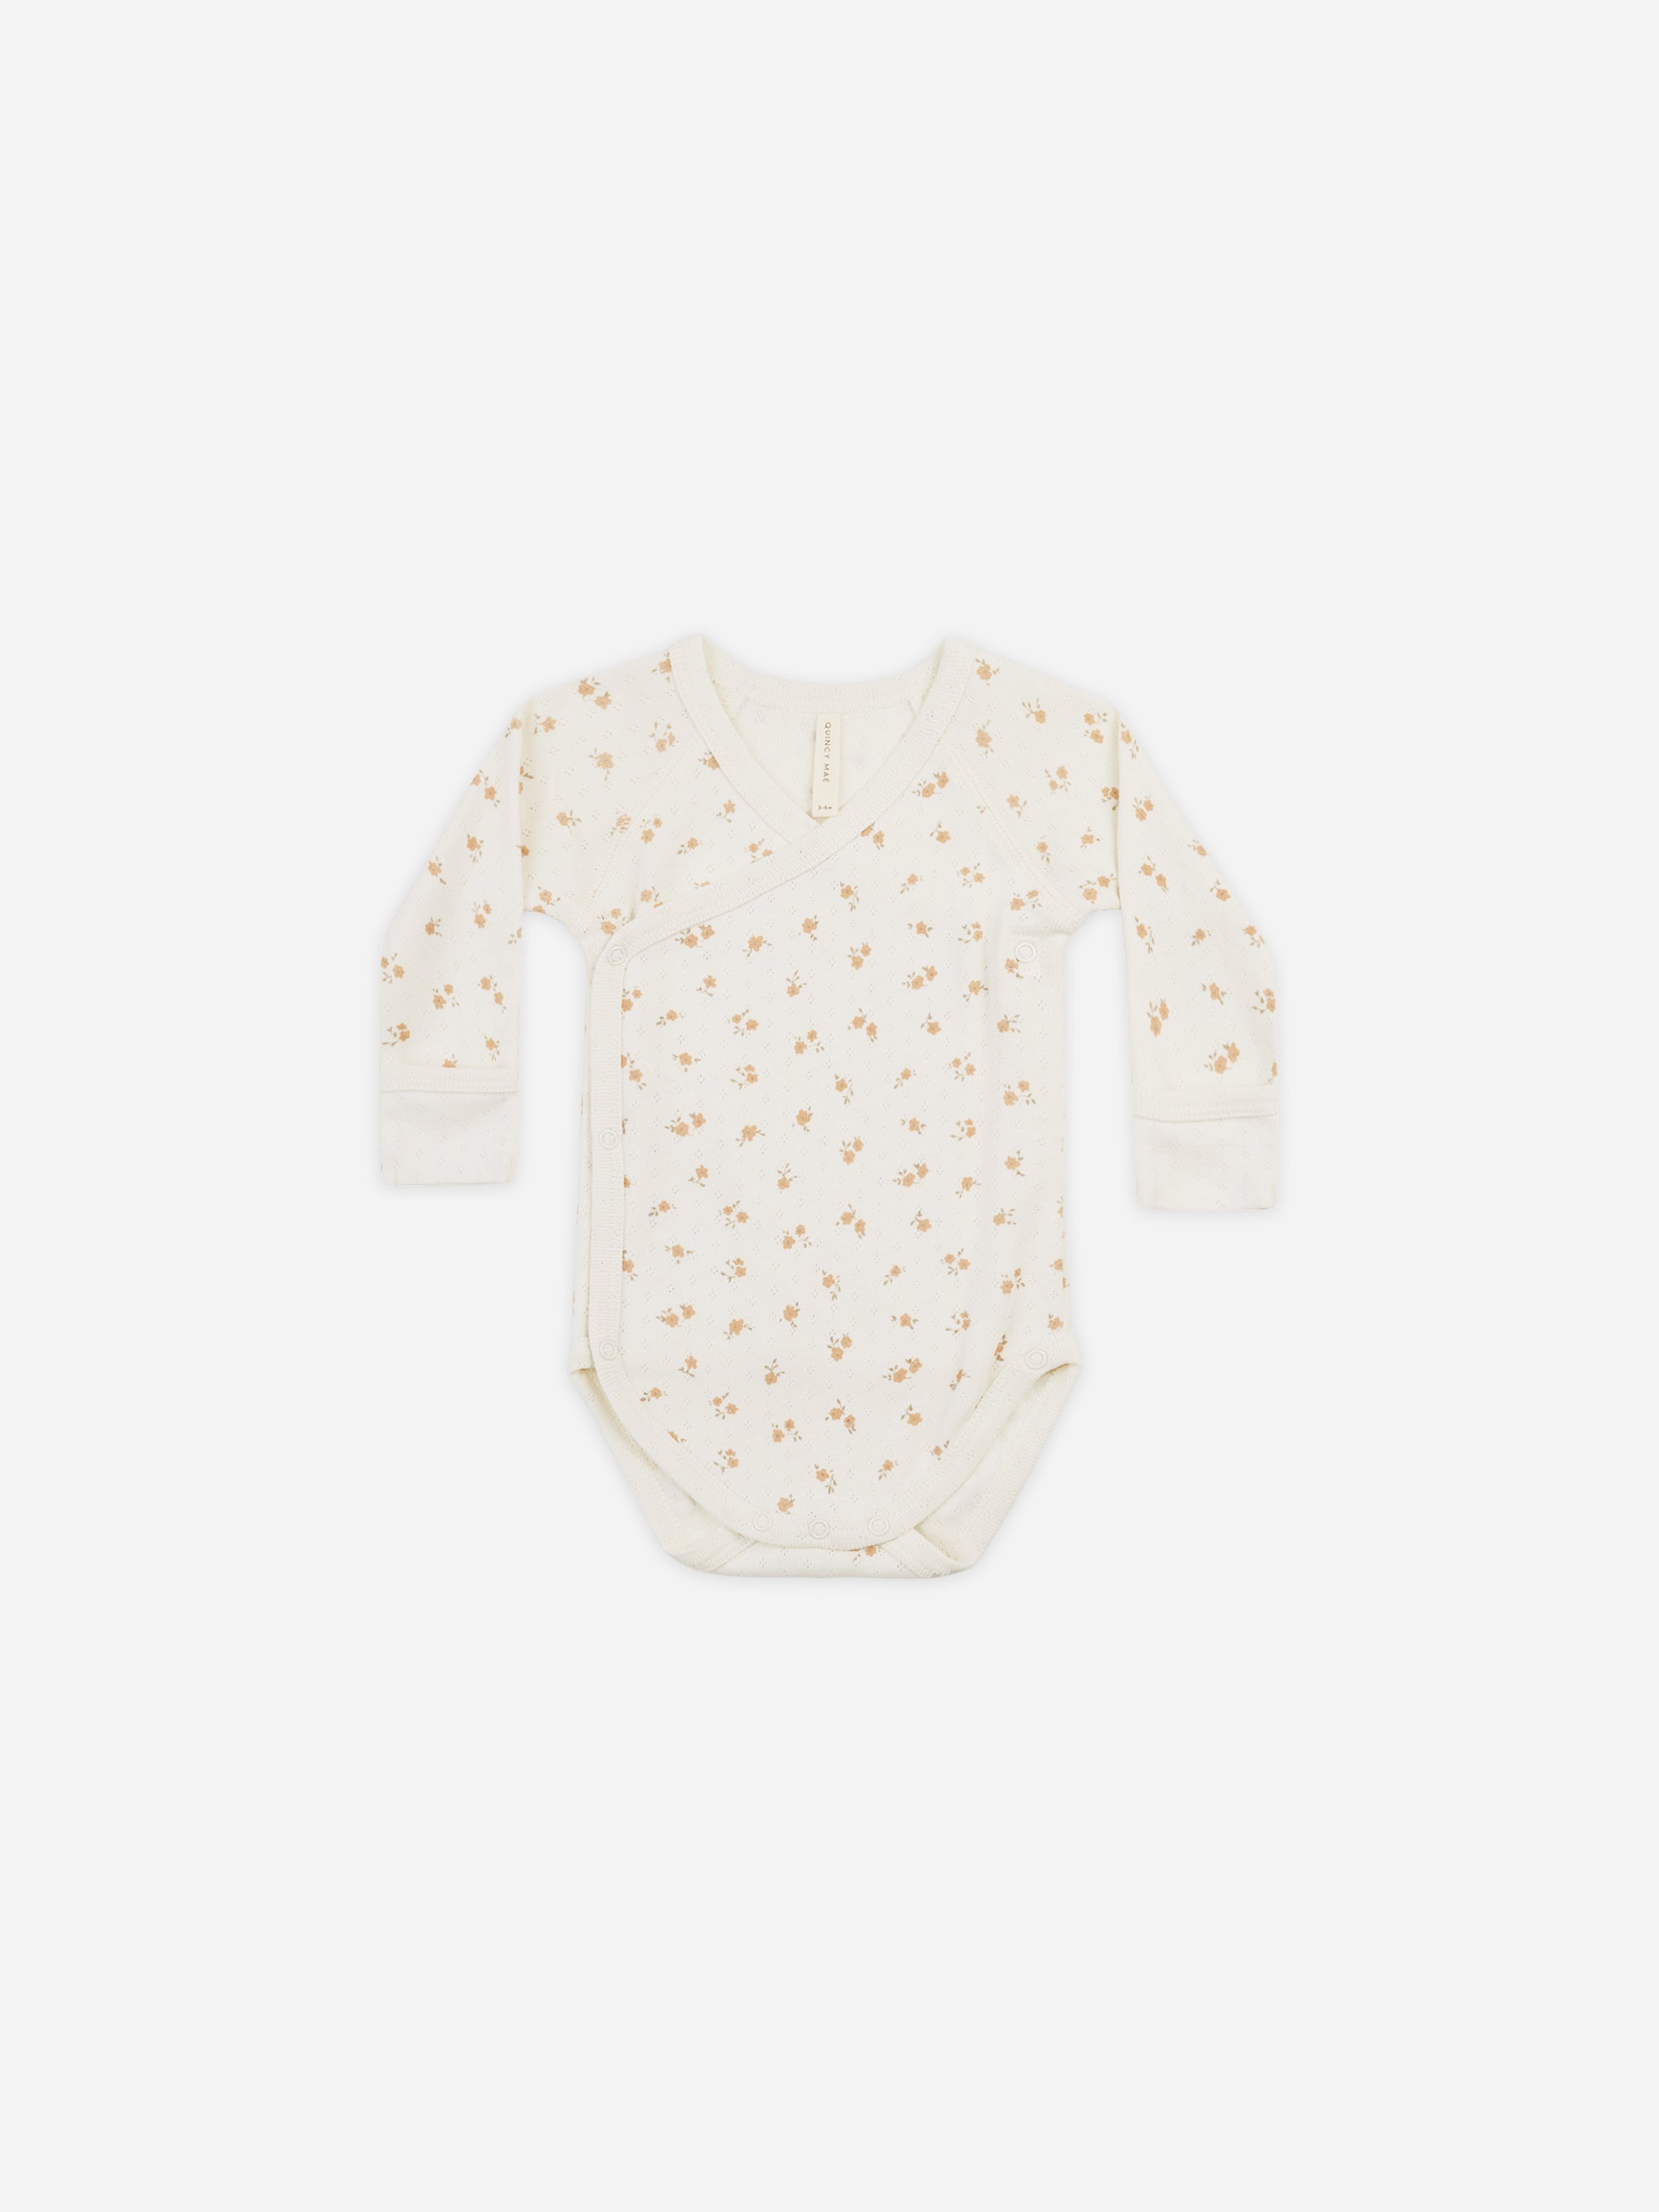 Pointelle Side Snap Bodysuit || Ditsy Melon - Rylee + Cru | Kids Clothes | Trendy Baby Clothes | Modern Infant Outfits |